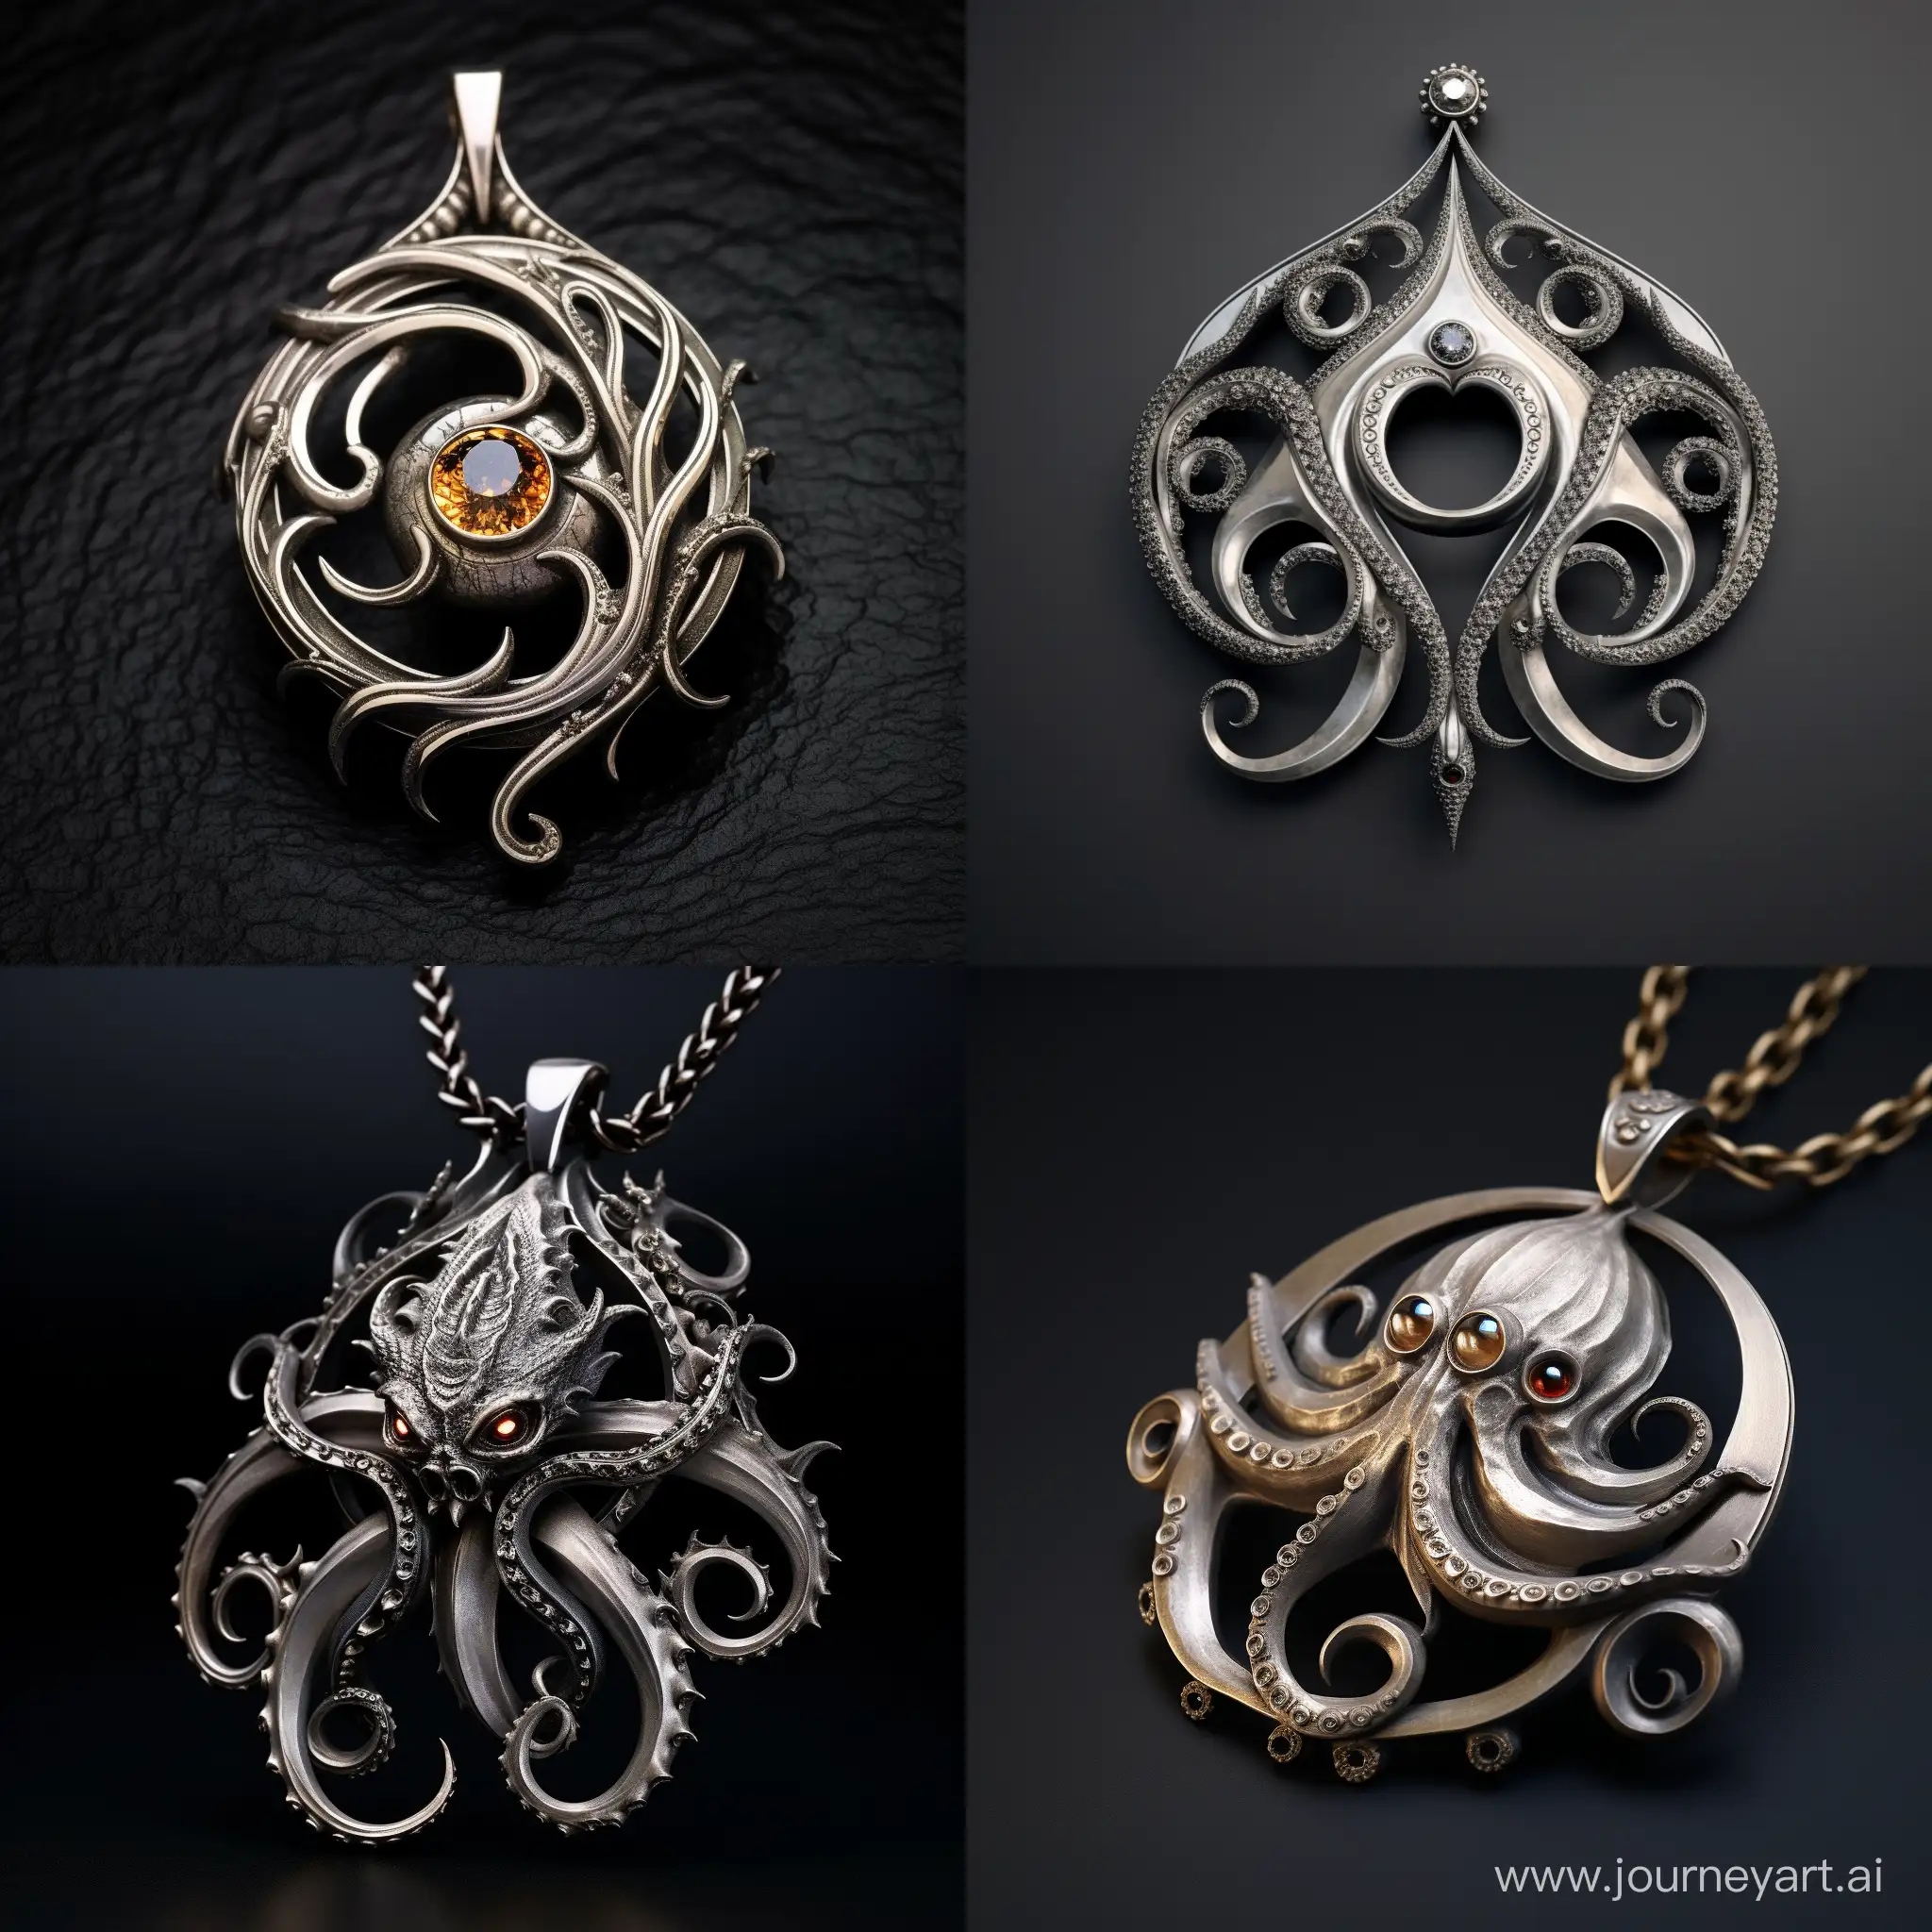 Octopus-Tentacles-Wheel-Pendant-with-Fiery-Eye-Center